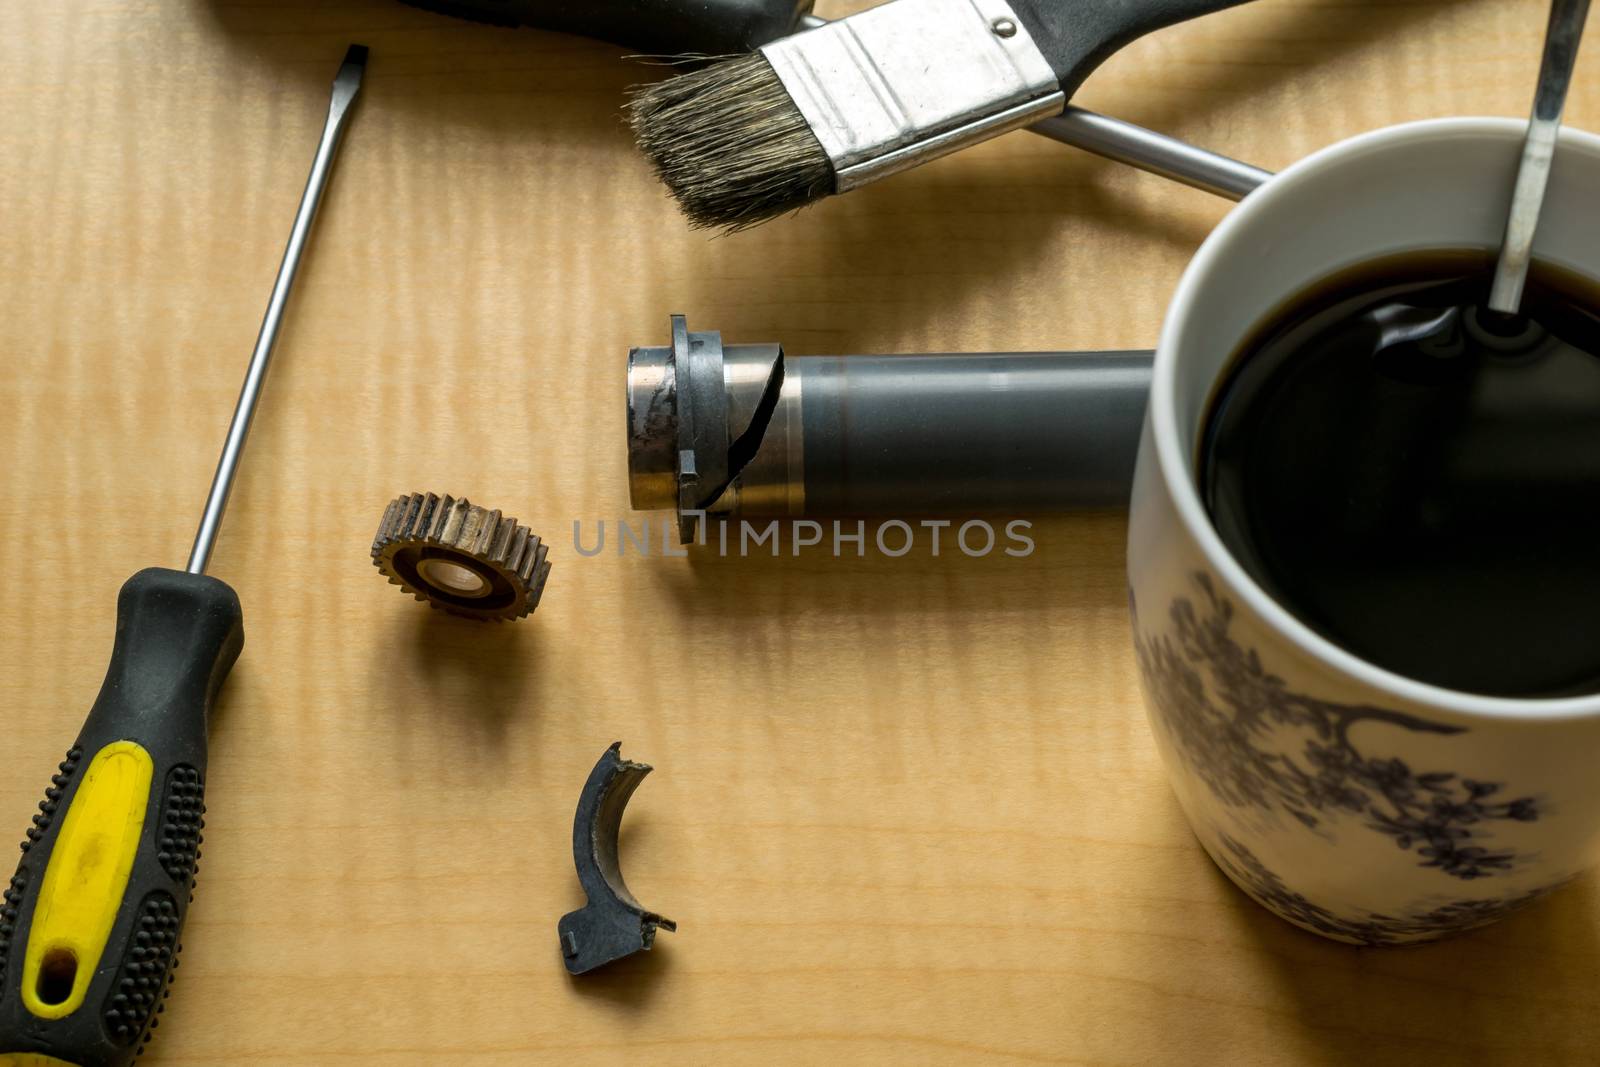 printer parts, tools, grease, broken gear and coffee mug on the table